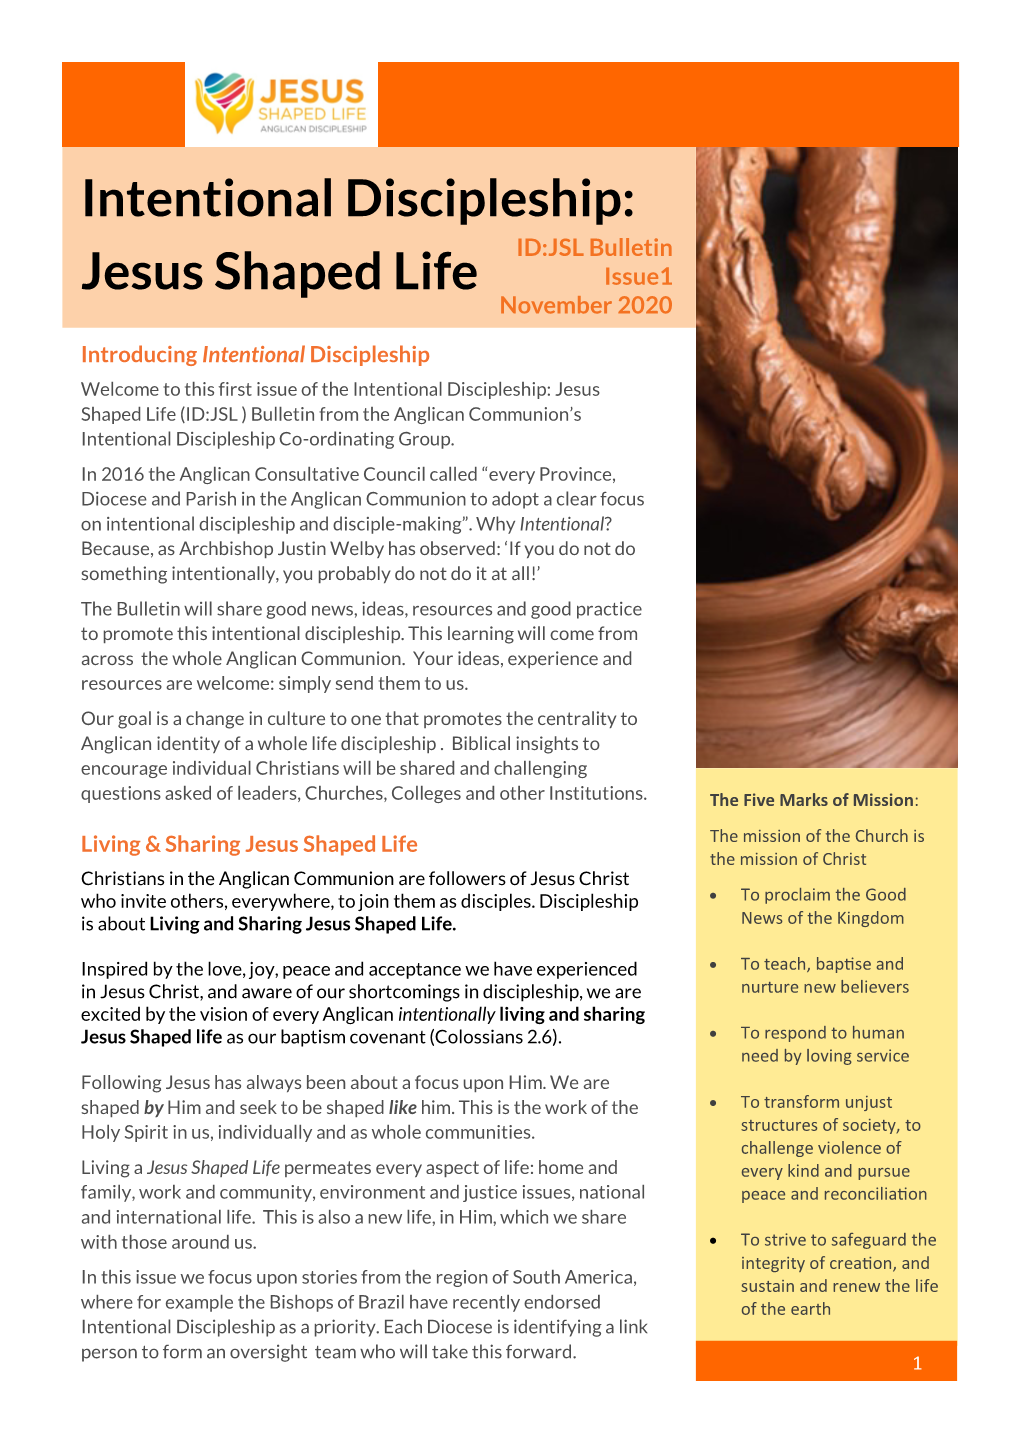 Intentional Discipleship: Jesus Shaped Life (ID:JSL ) Bulletin from the Anglican Communion’S Intentional Discipleship Co-Ordinating Group